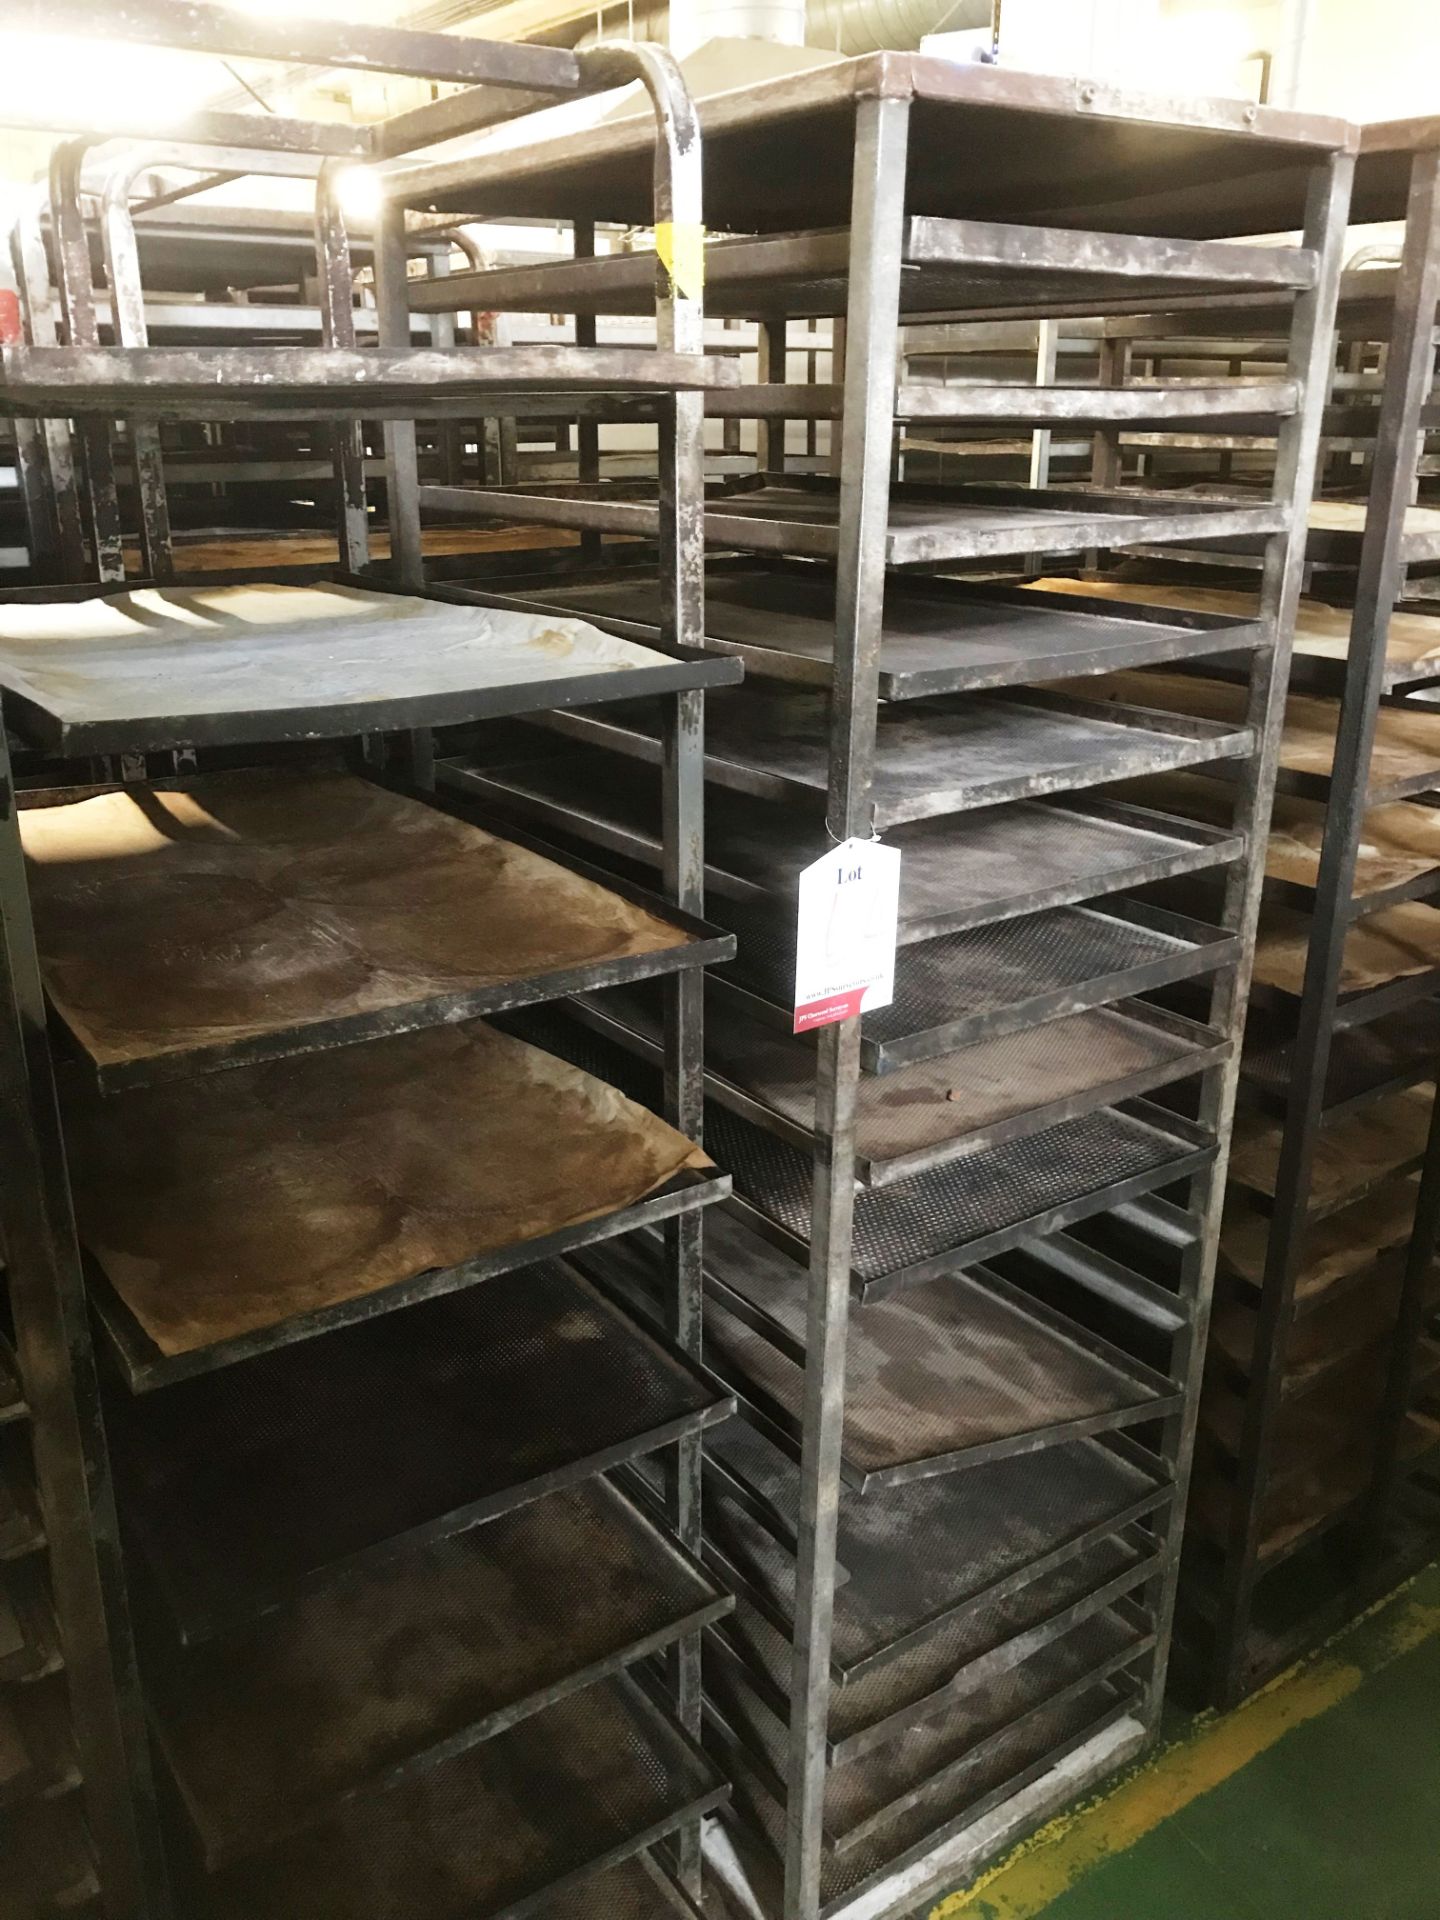 13 x Various Bakery Racks & Trays - As Pictured - Image 3 of 3